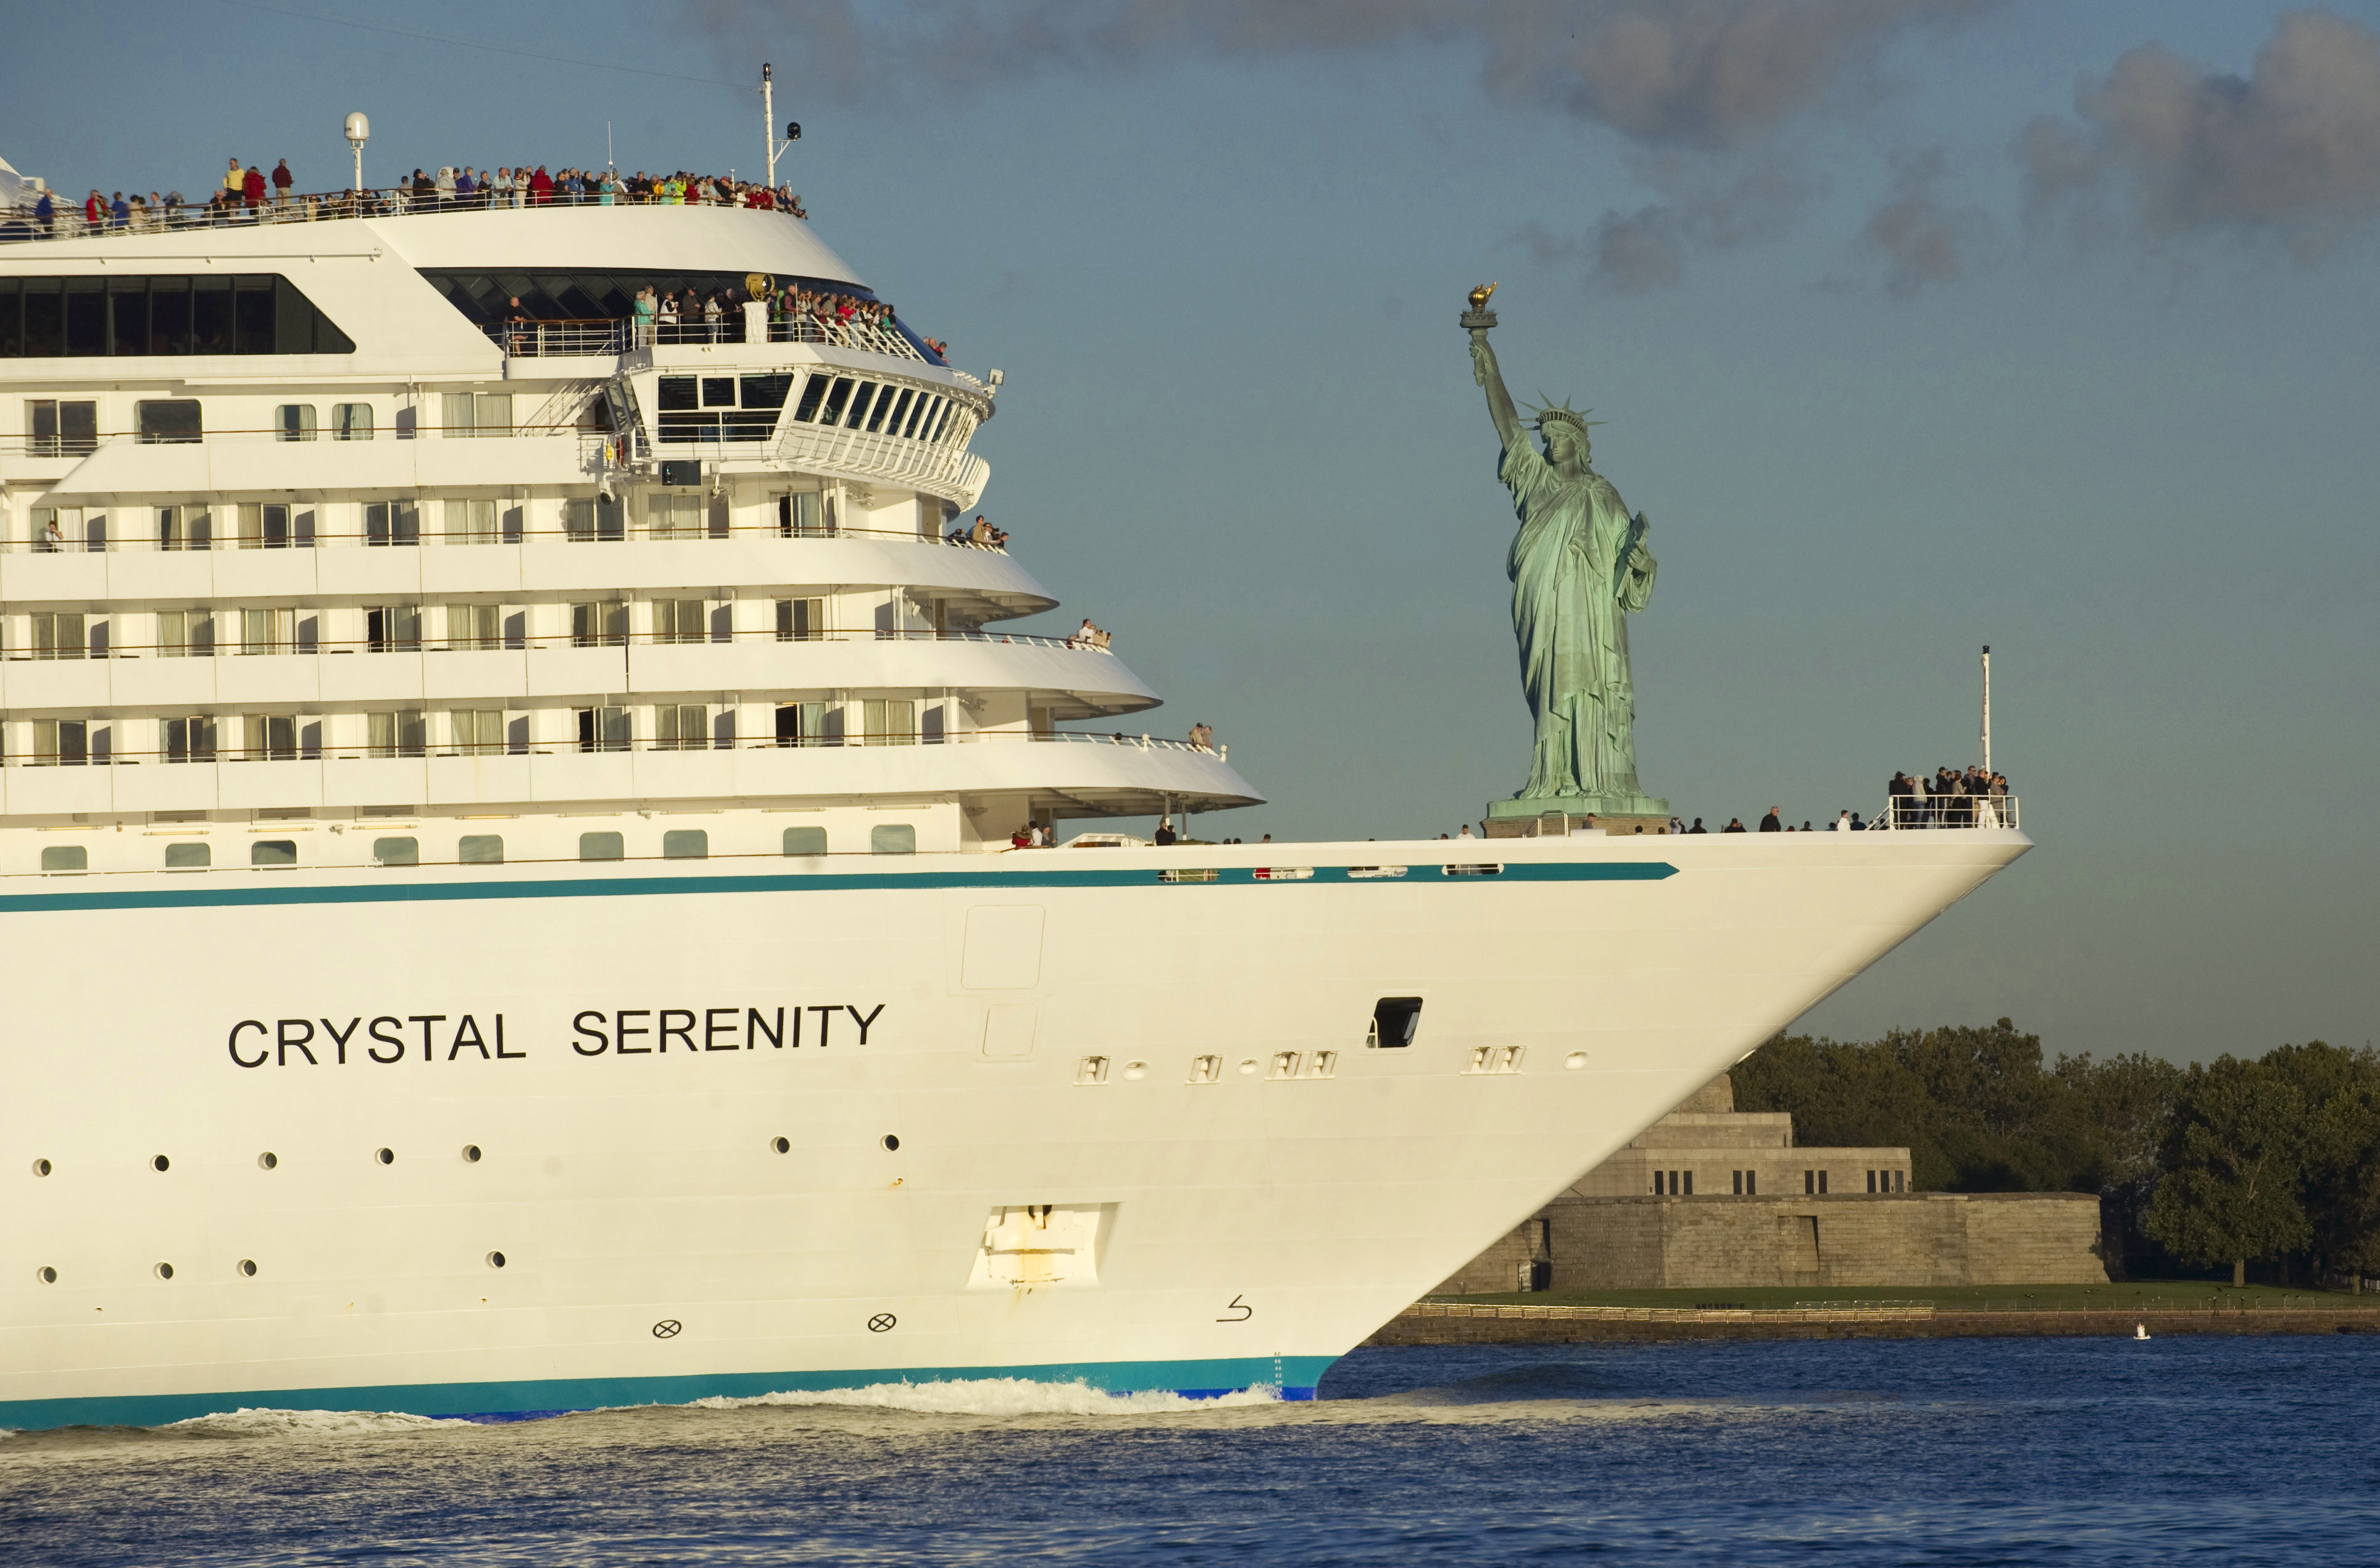 Crystal Serenity to start sailing in the Bahamas before August 2021